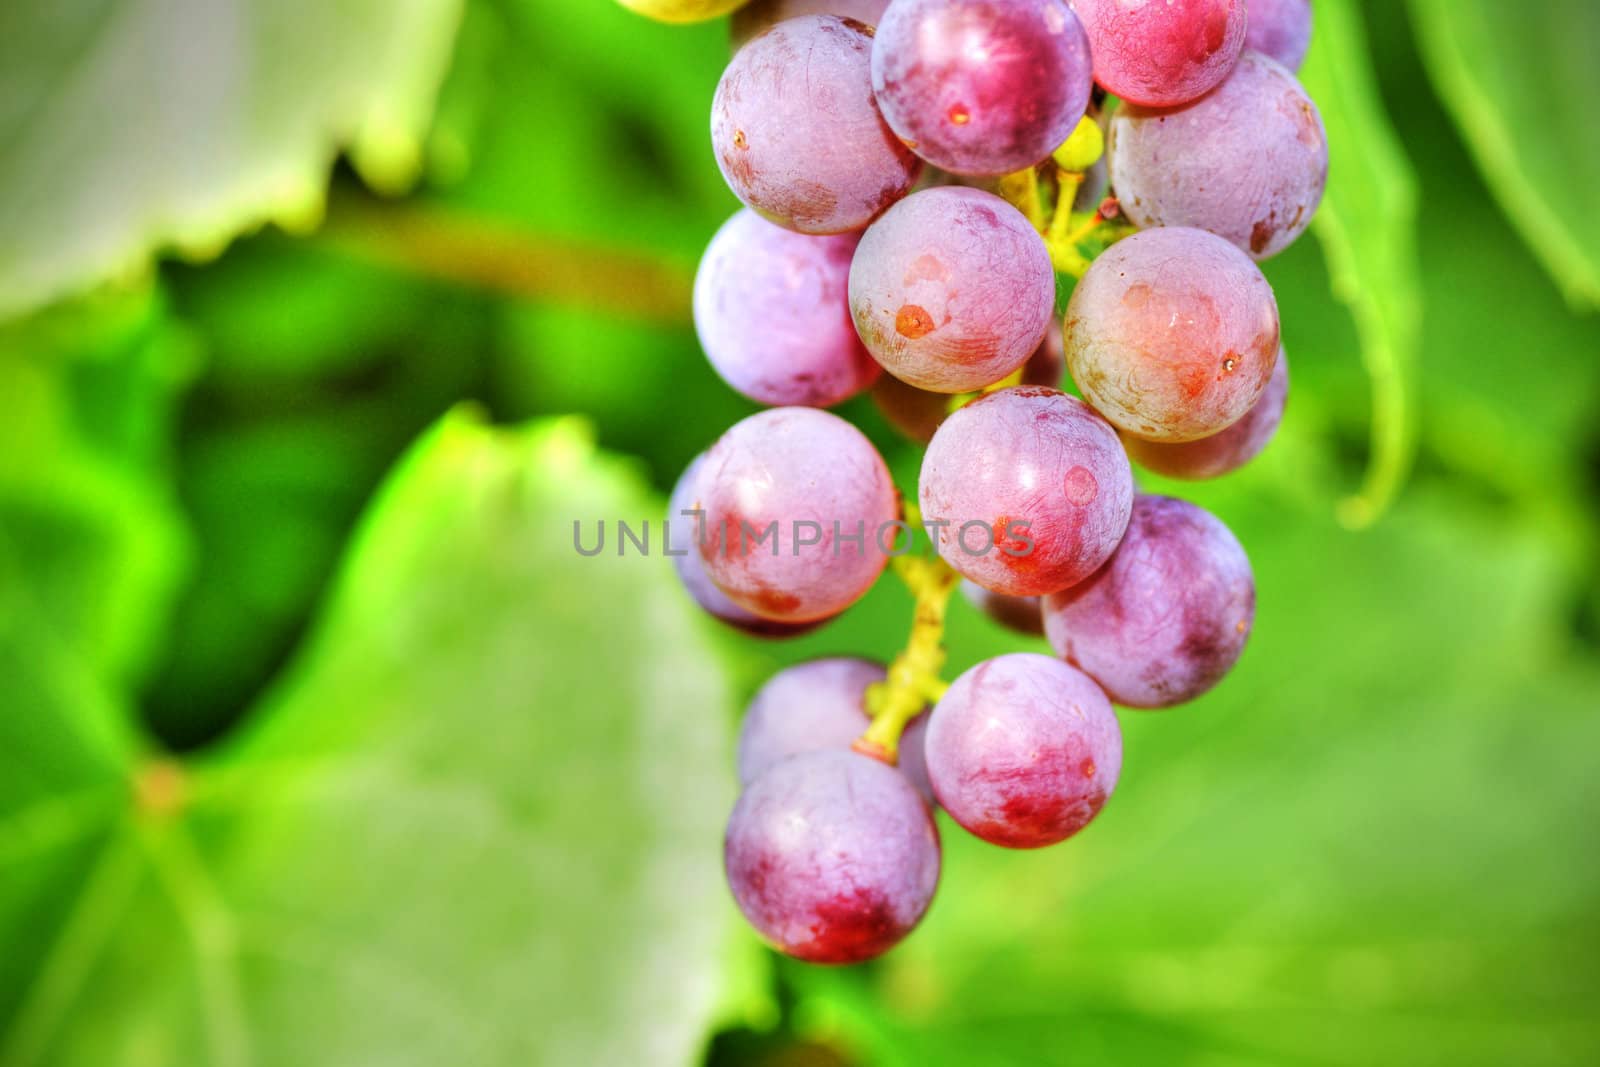 Grapes on vine by Mirage3